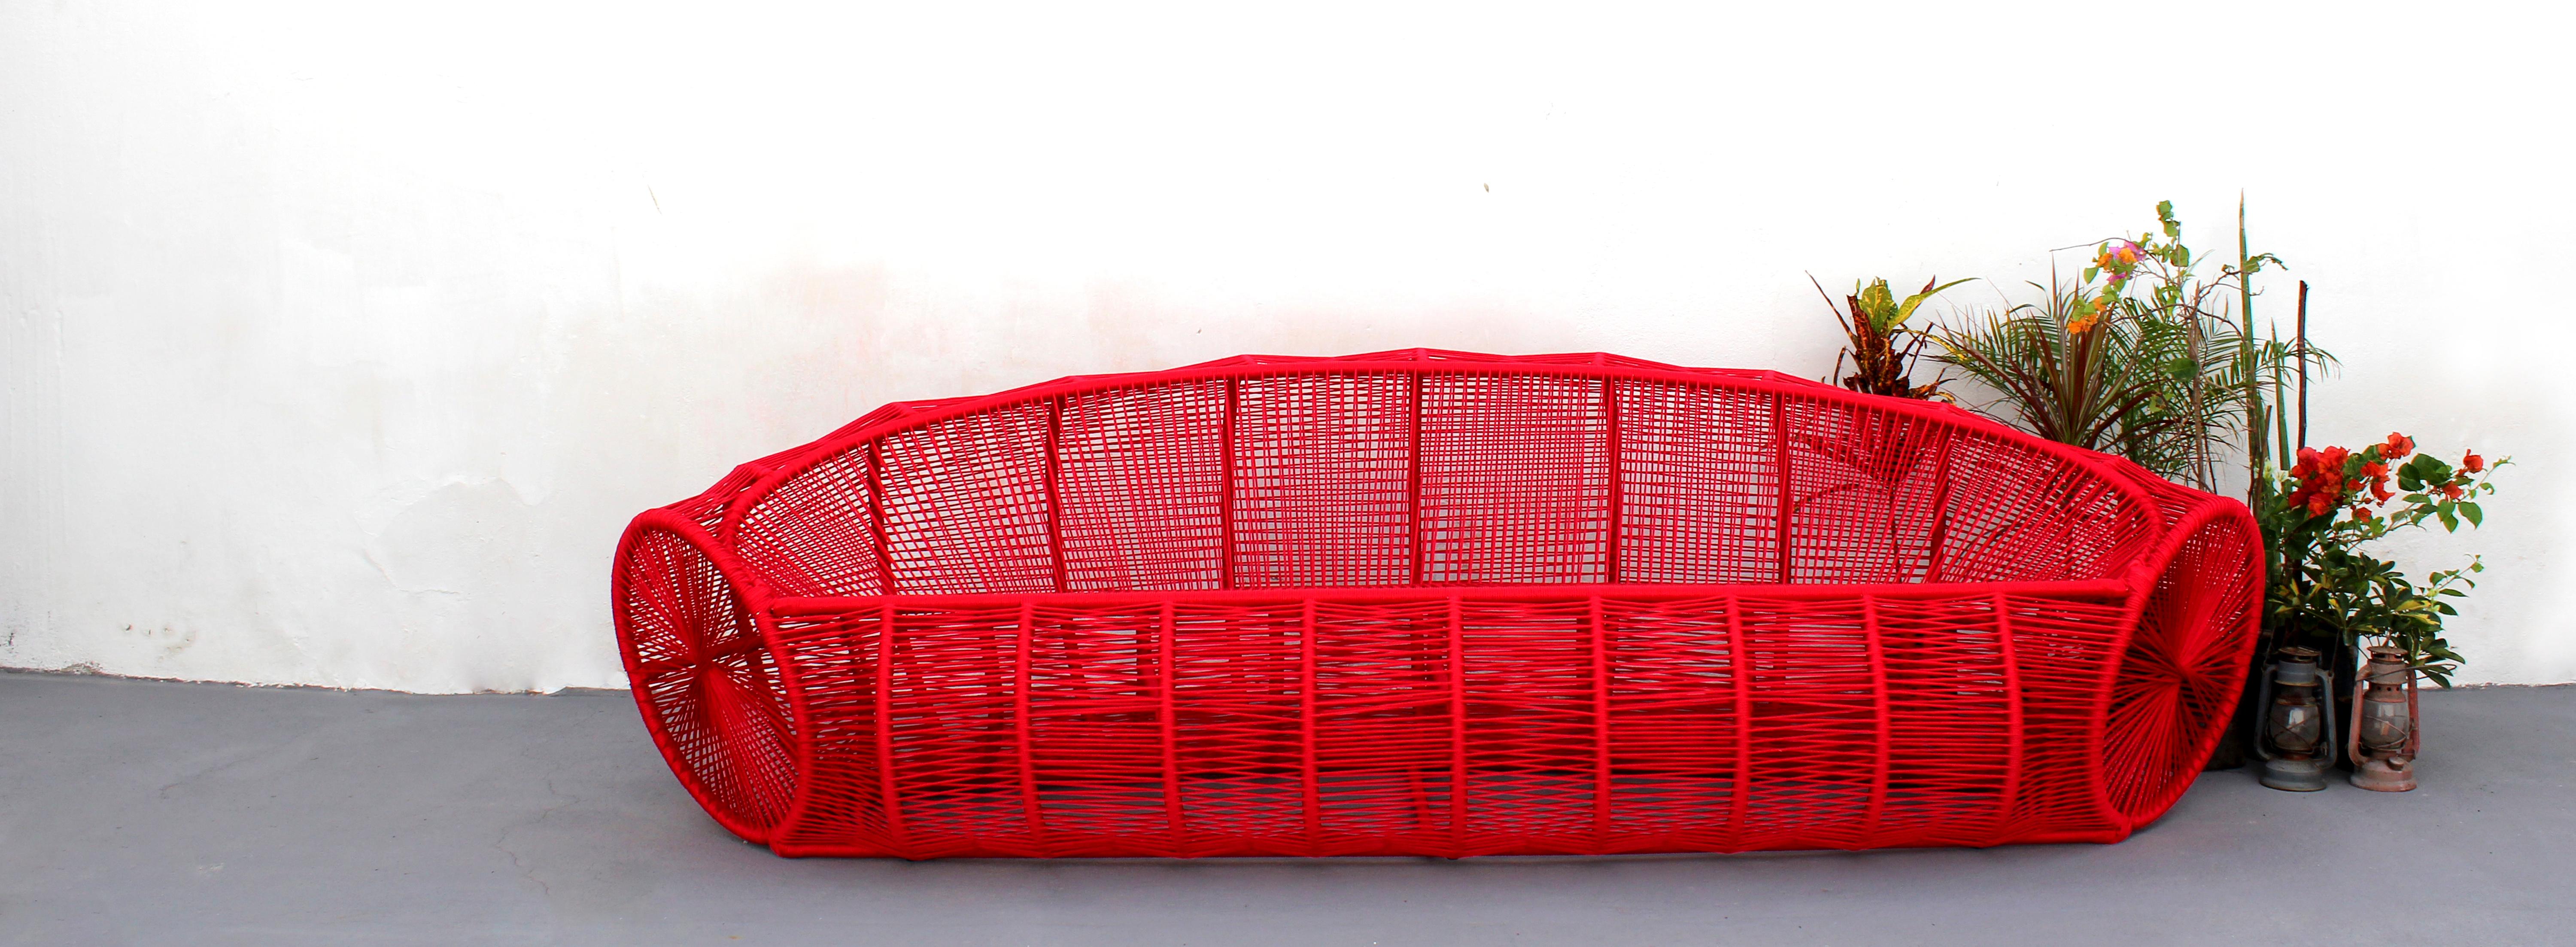 3-seat sofa for external and internal area.

Piece inspired in wicker or liana basket that serves to carry
groceries and is transported by pack animals at the countryside of the Brazilian Northeast.
  